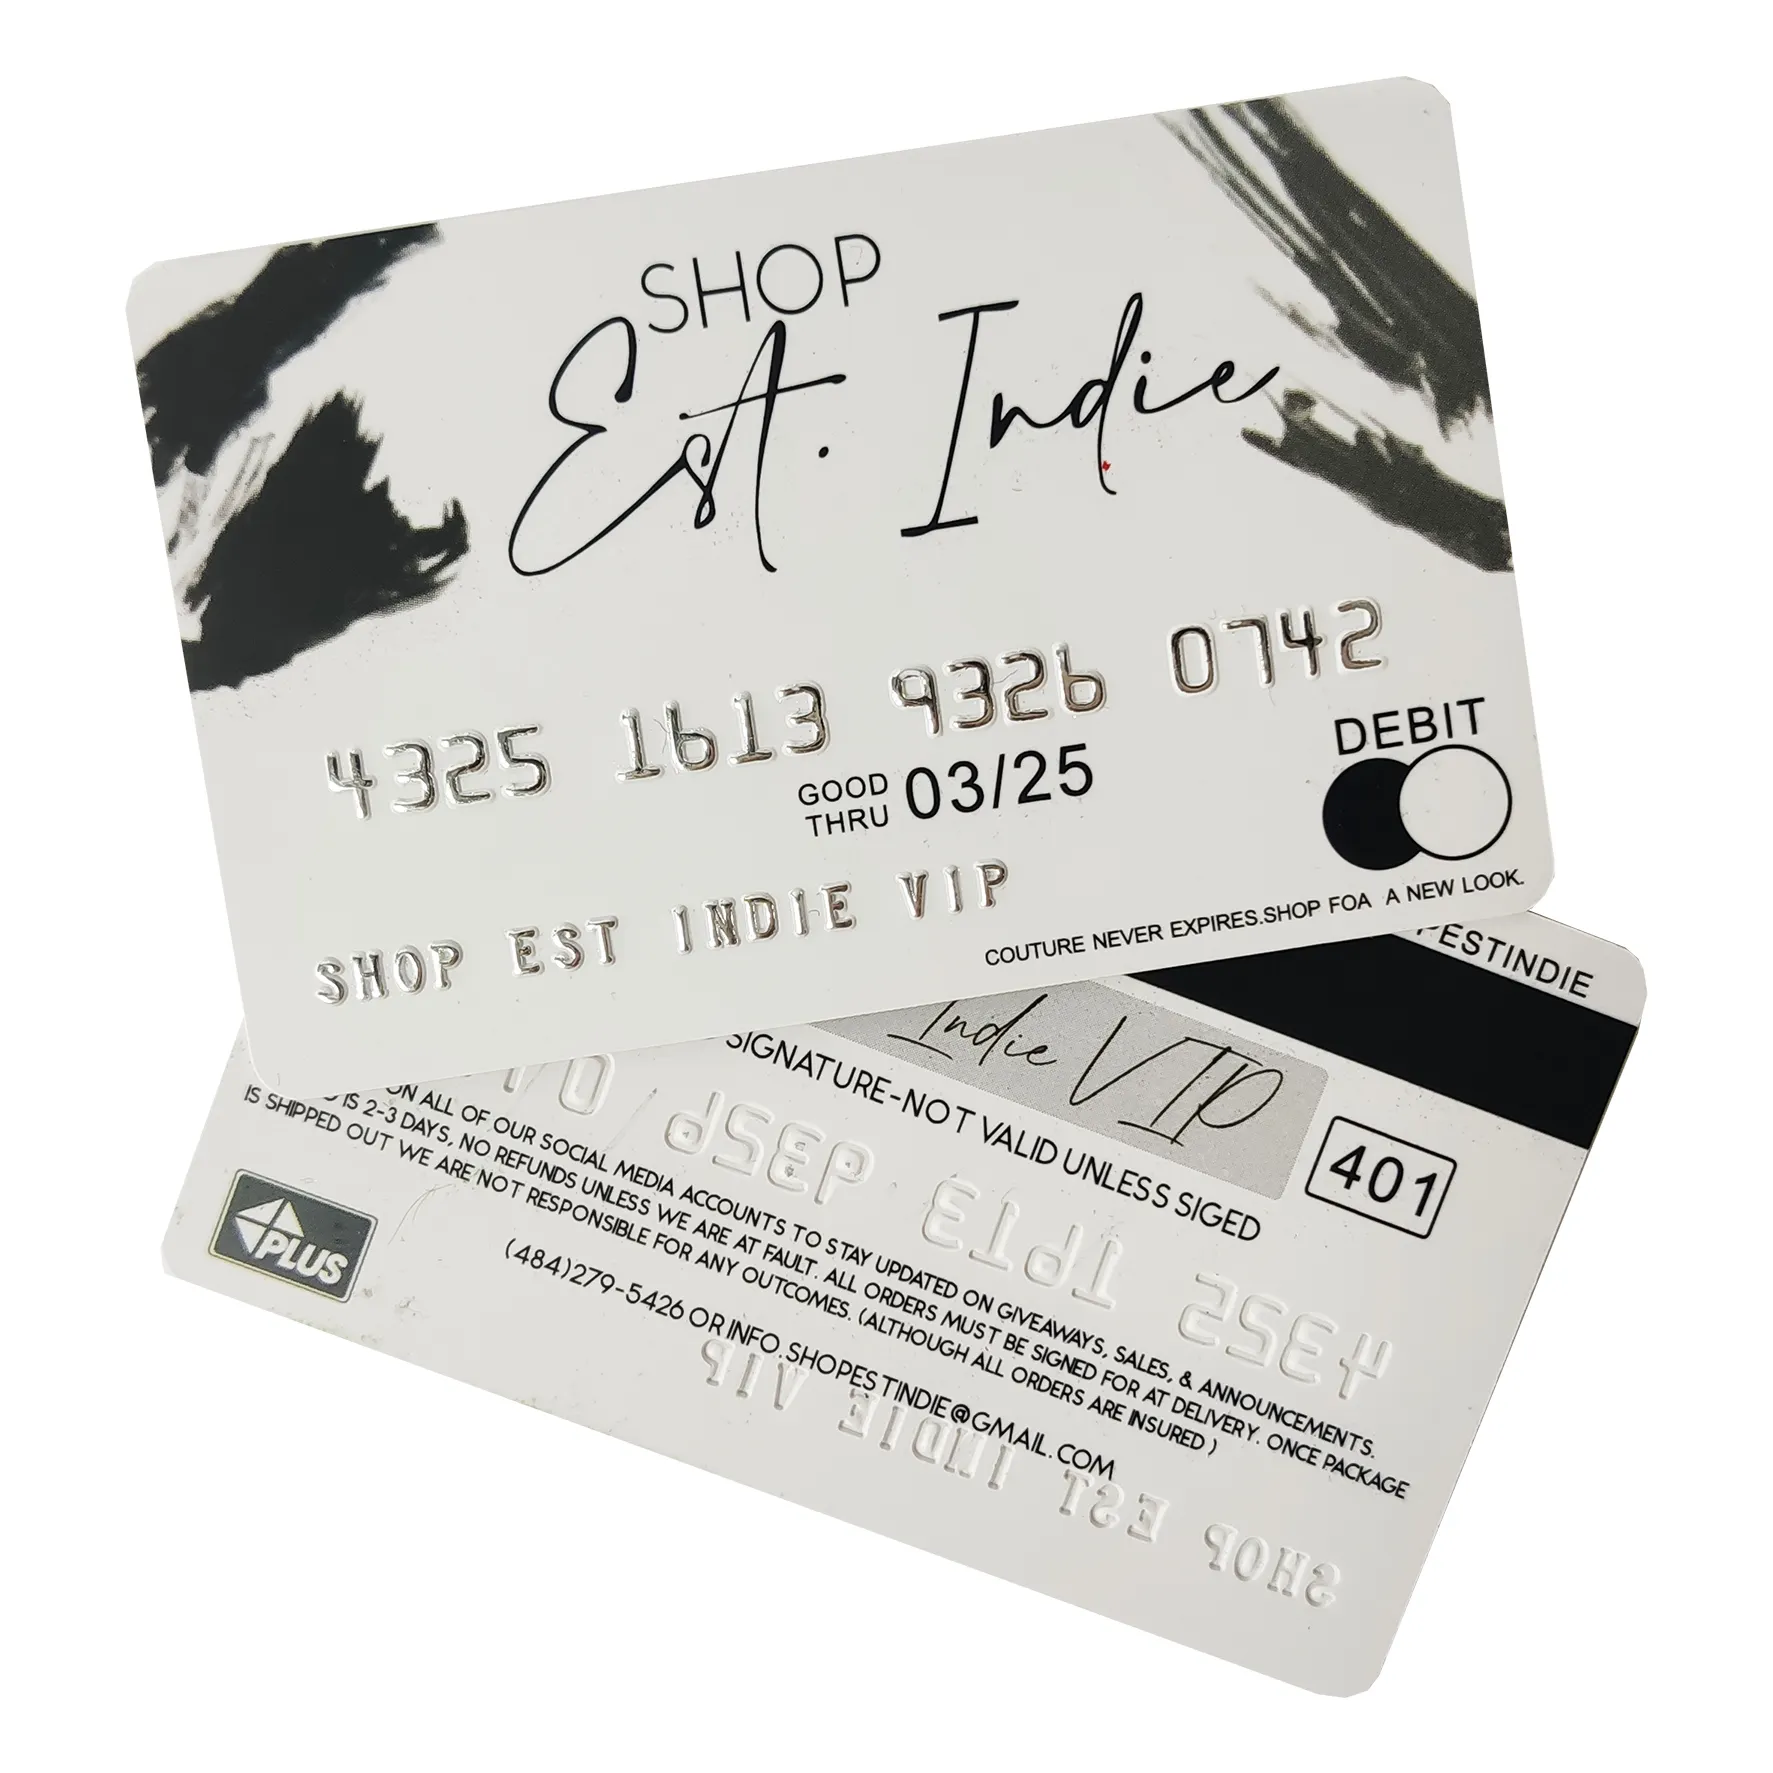 Supply customized print credit card business cards